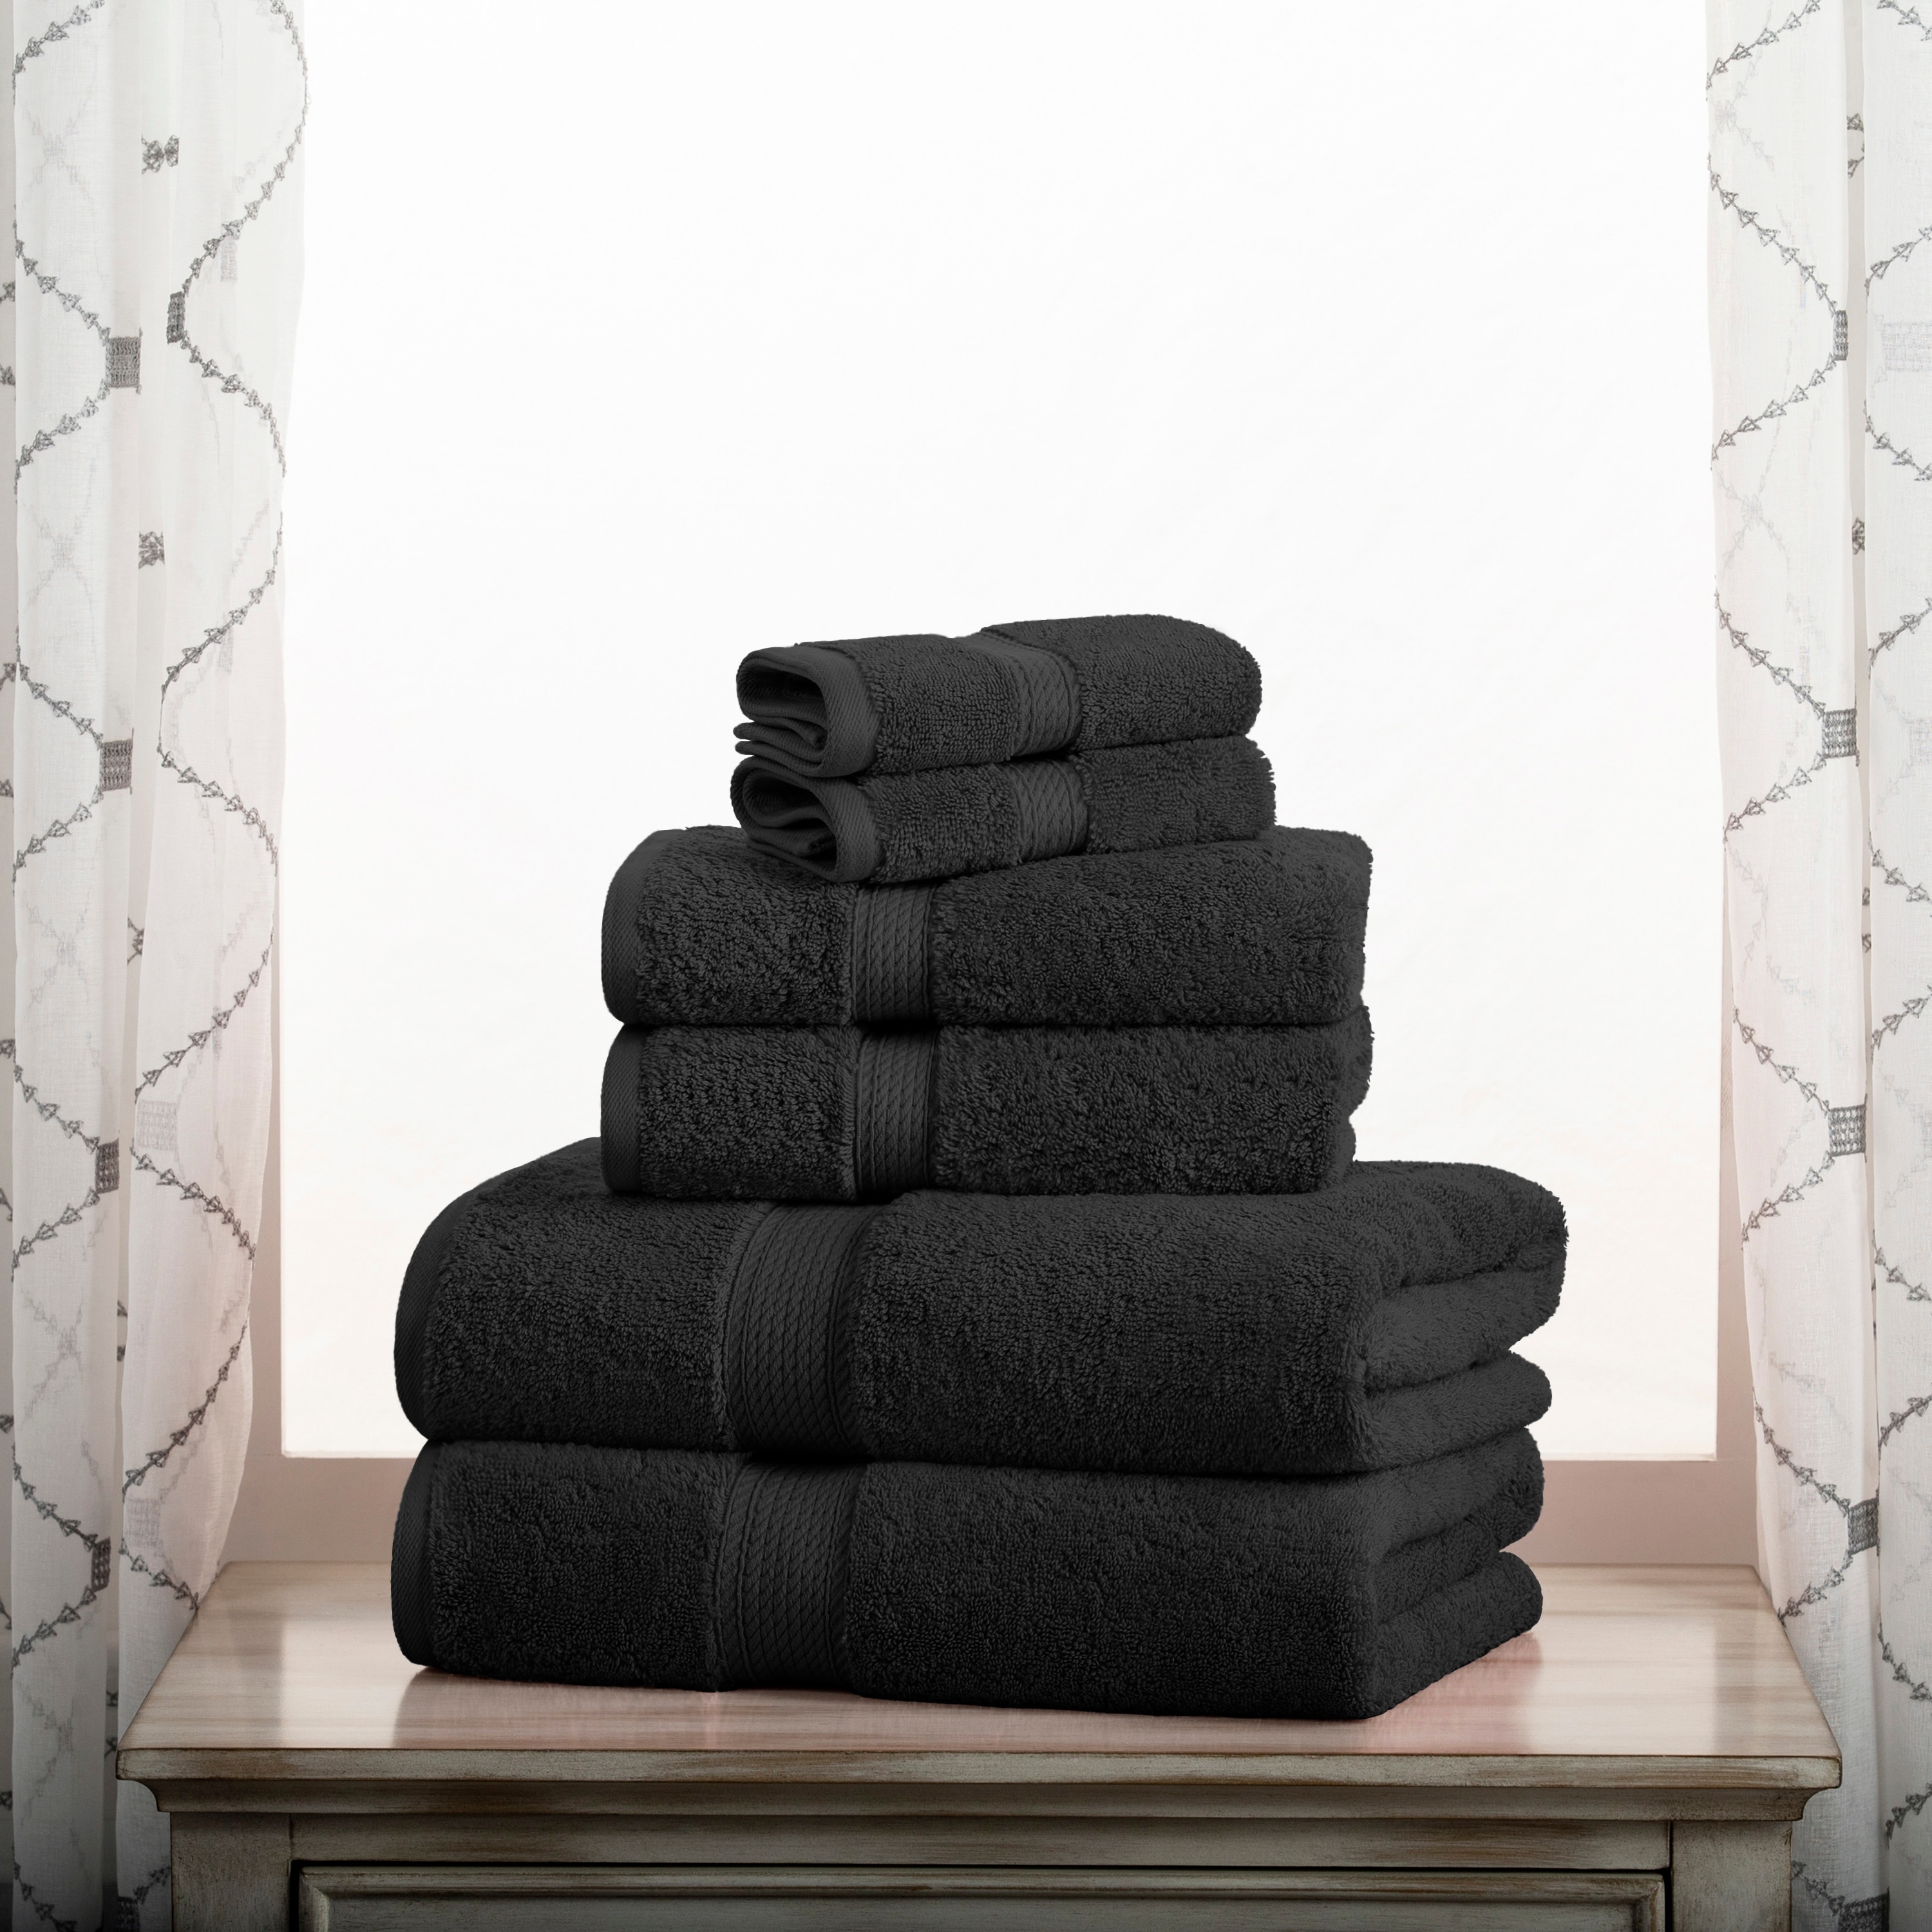 https://ak1.ostkcdn.com/images/products/is/images/direct/cebd3d19f14db35ec32c304c17ed47d2df27a8ca/Egyptian-Cotton-Heavyweight-Solid-Plush-Towel-Set-by-Superior.jpg